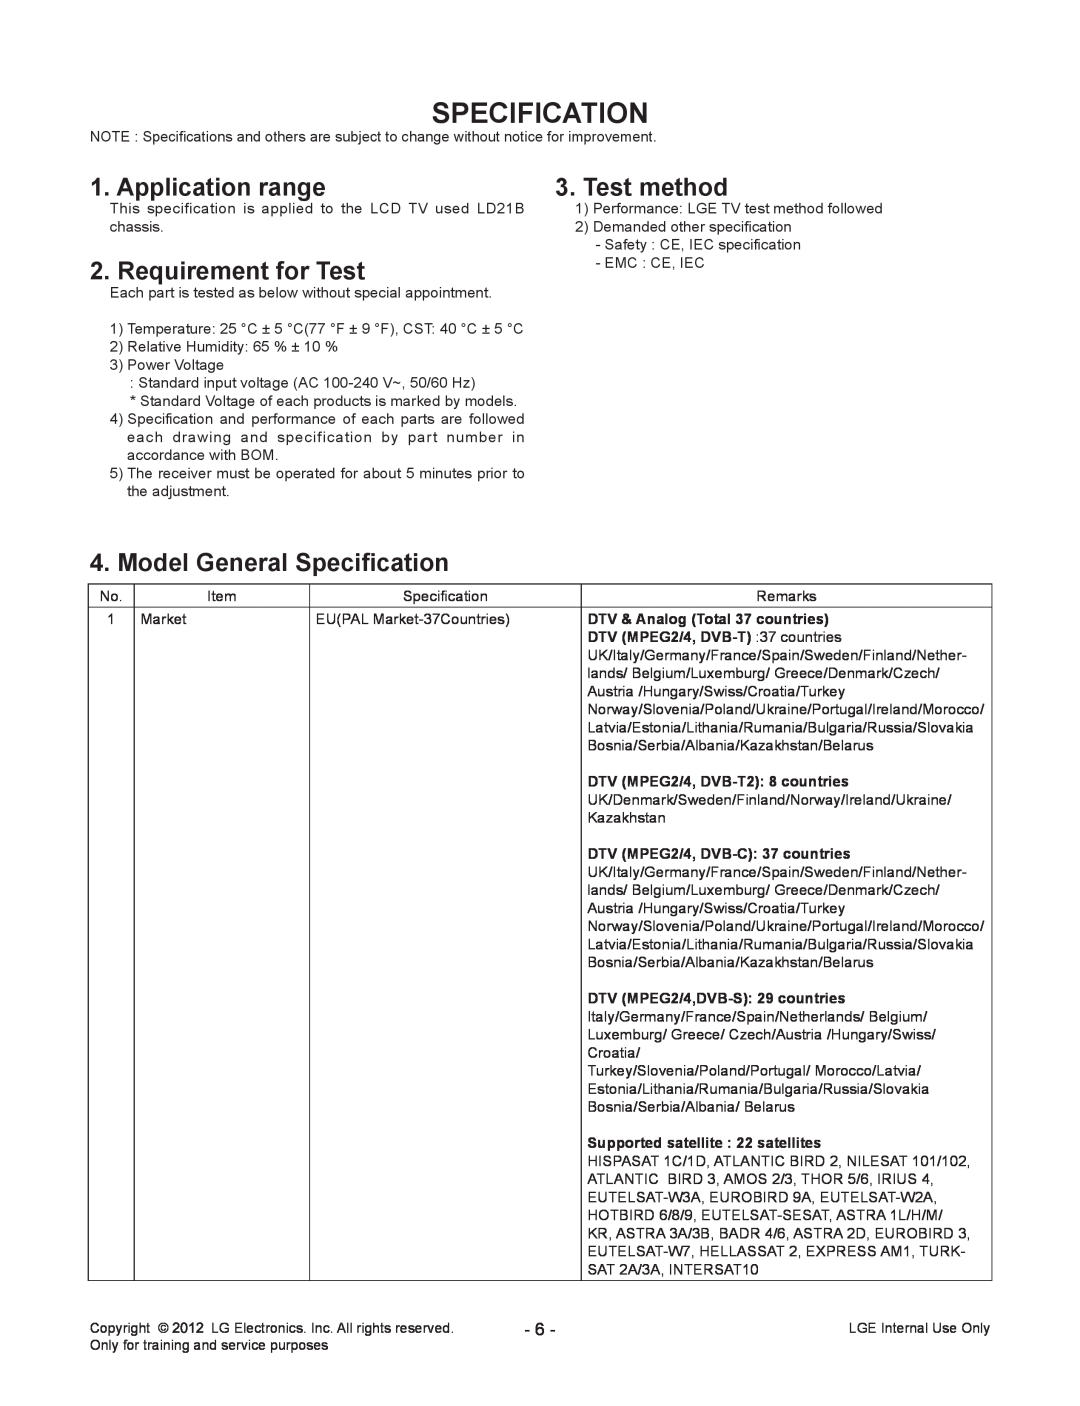 LG Electronics 32LS679C-ZC service manual Specification, Application range, Test method, Requirement for Test 